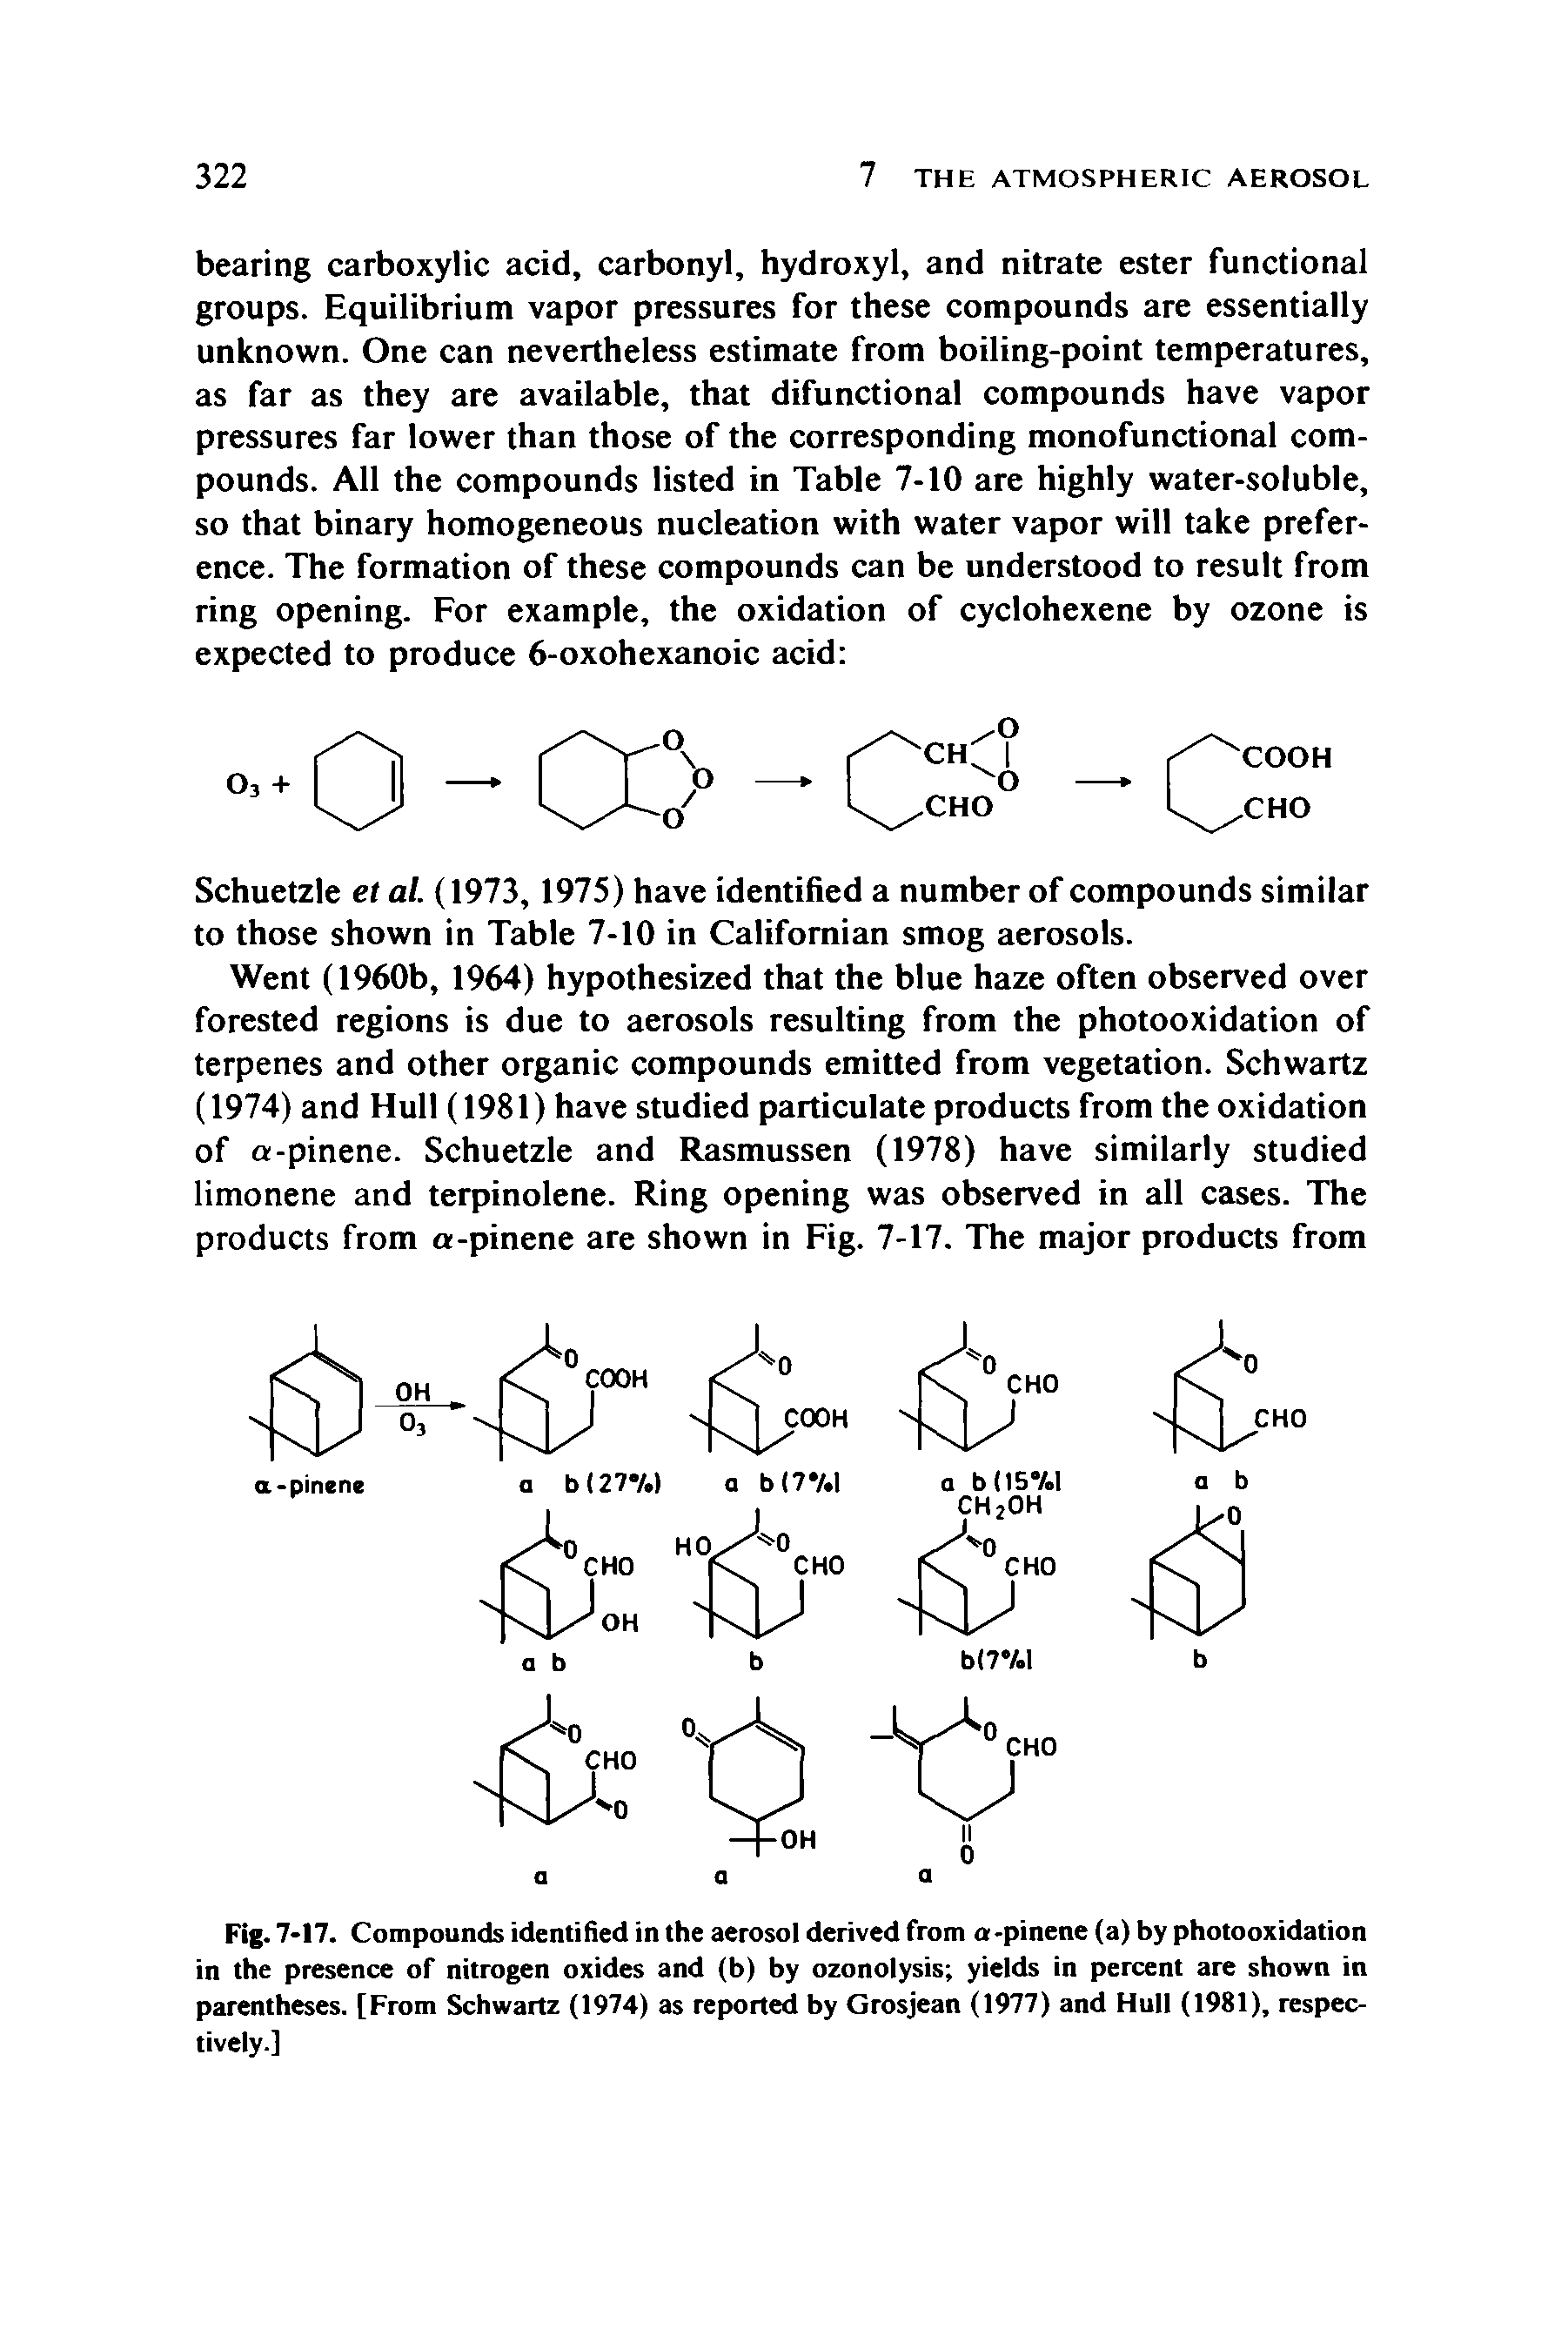 Fig. 7-17. Compounds identified in the aerosol derived from a-pinene (a) by photooxidation in the presence of nitrogen oxides and (b) by ozonolysis yields in percent are shown in parentheses. [From Schwartz (1974) as reported by Grosjean (1977) and Hull (1981), respectively.]...